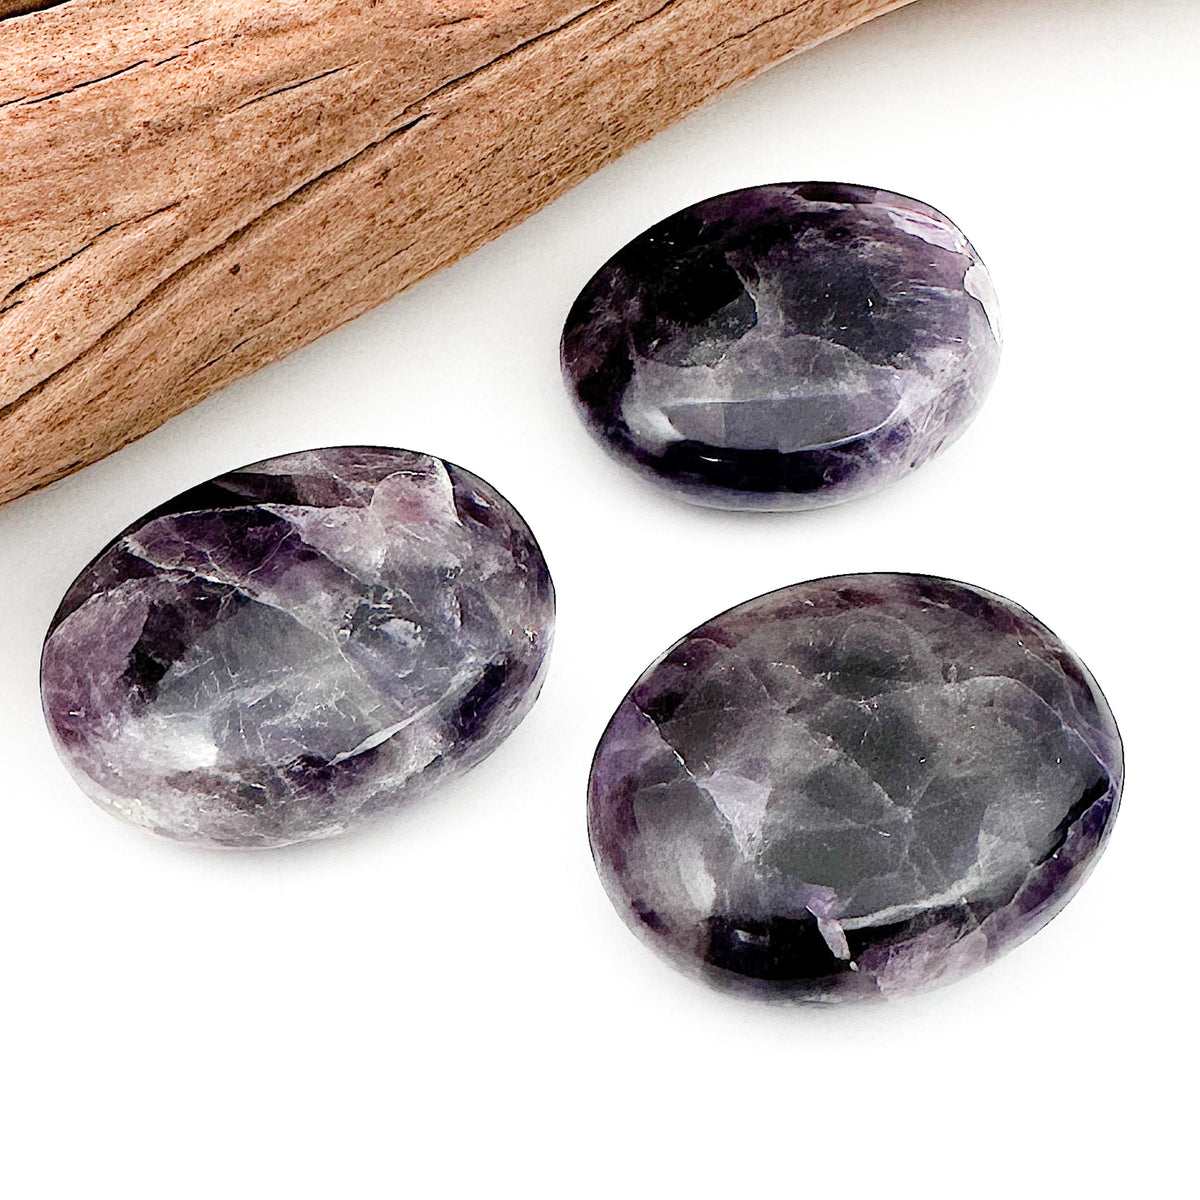 Three amethyst palm stones placed together against a white background